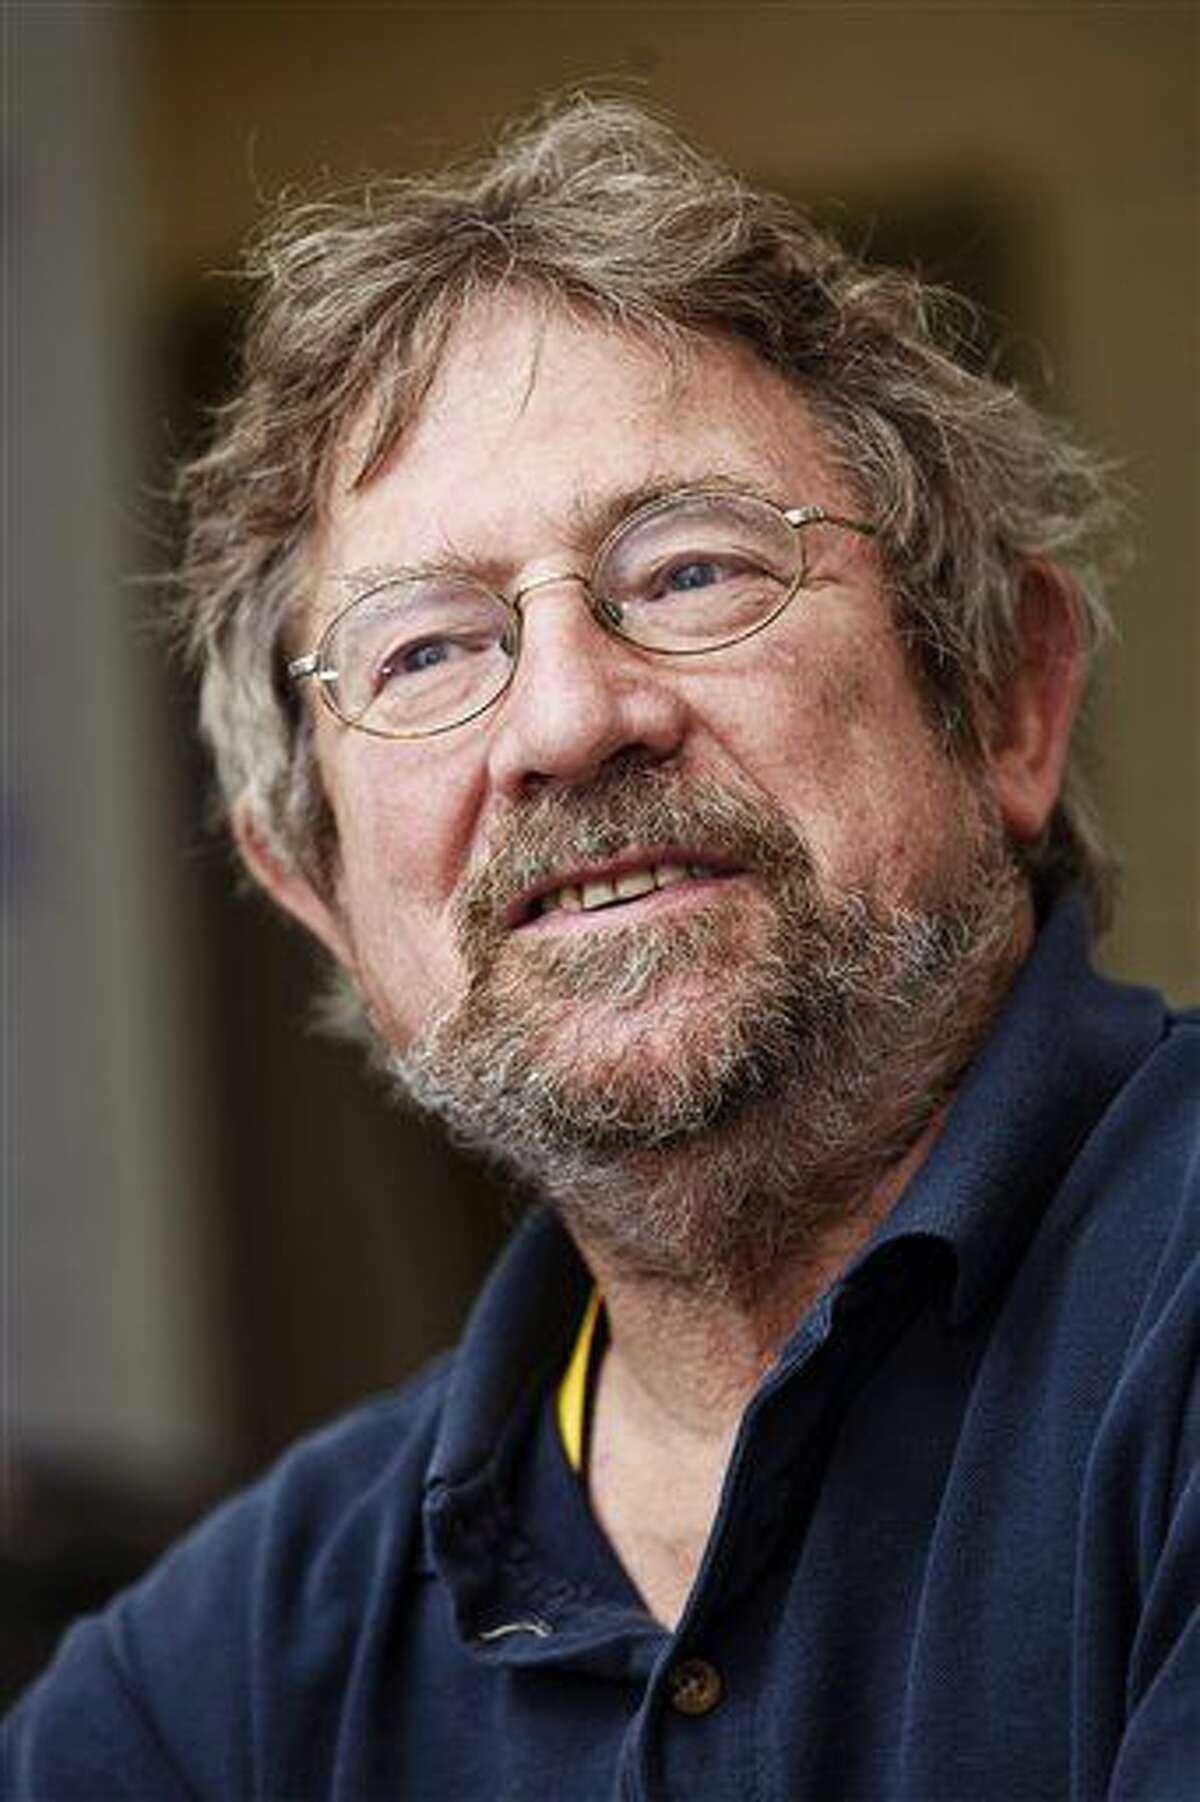 John Michael Kosterlitz, one of the scientists that has been awarded the Nobel Prize in physics, poses for a photo at Aalto University in Espoo, Finland, Tuesday Oct. 4, 2016. The Royal Swedish Academy of Sciences has cited David Thouless, Duncan Haldane and Michael Kosterlitz for "theoretical discoveries of topological phase transitions and topological phases of matter." (Roni Rekomaa/Lehtikuva via AP)